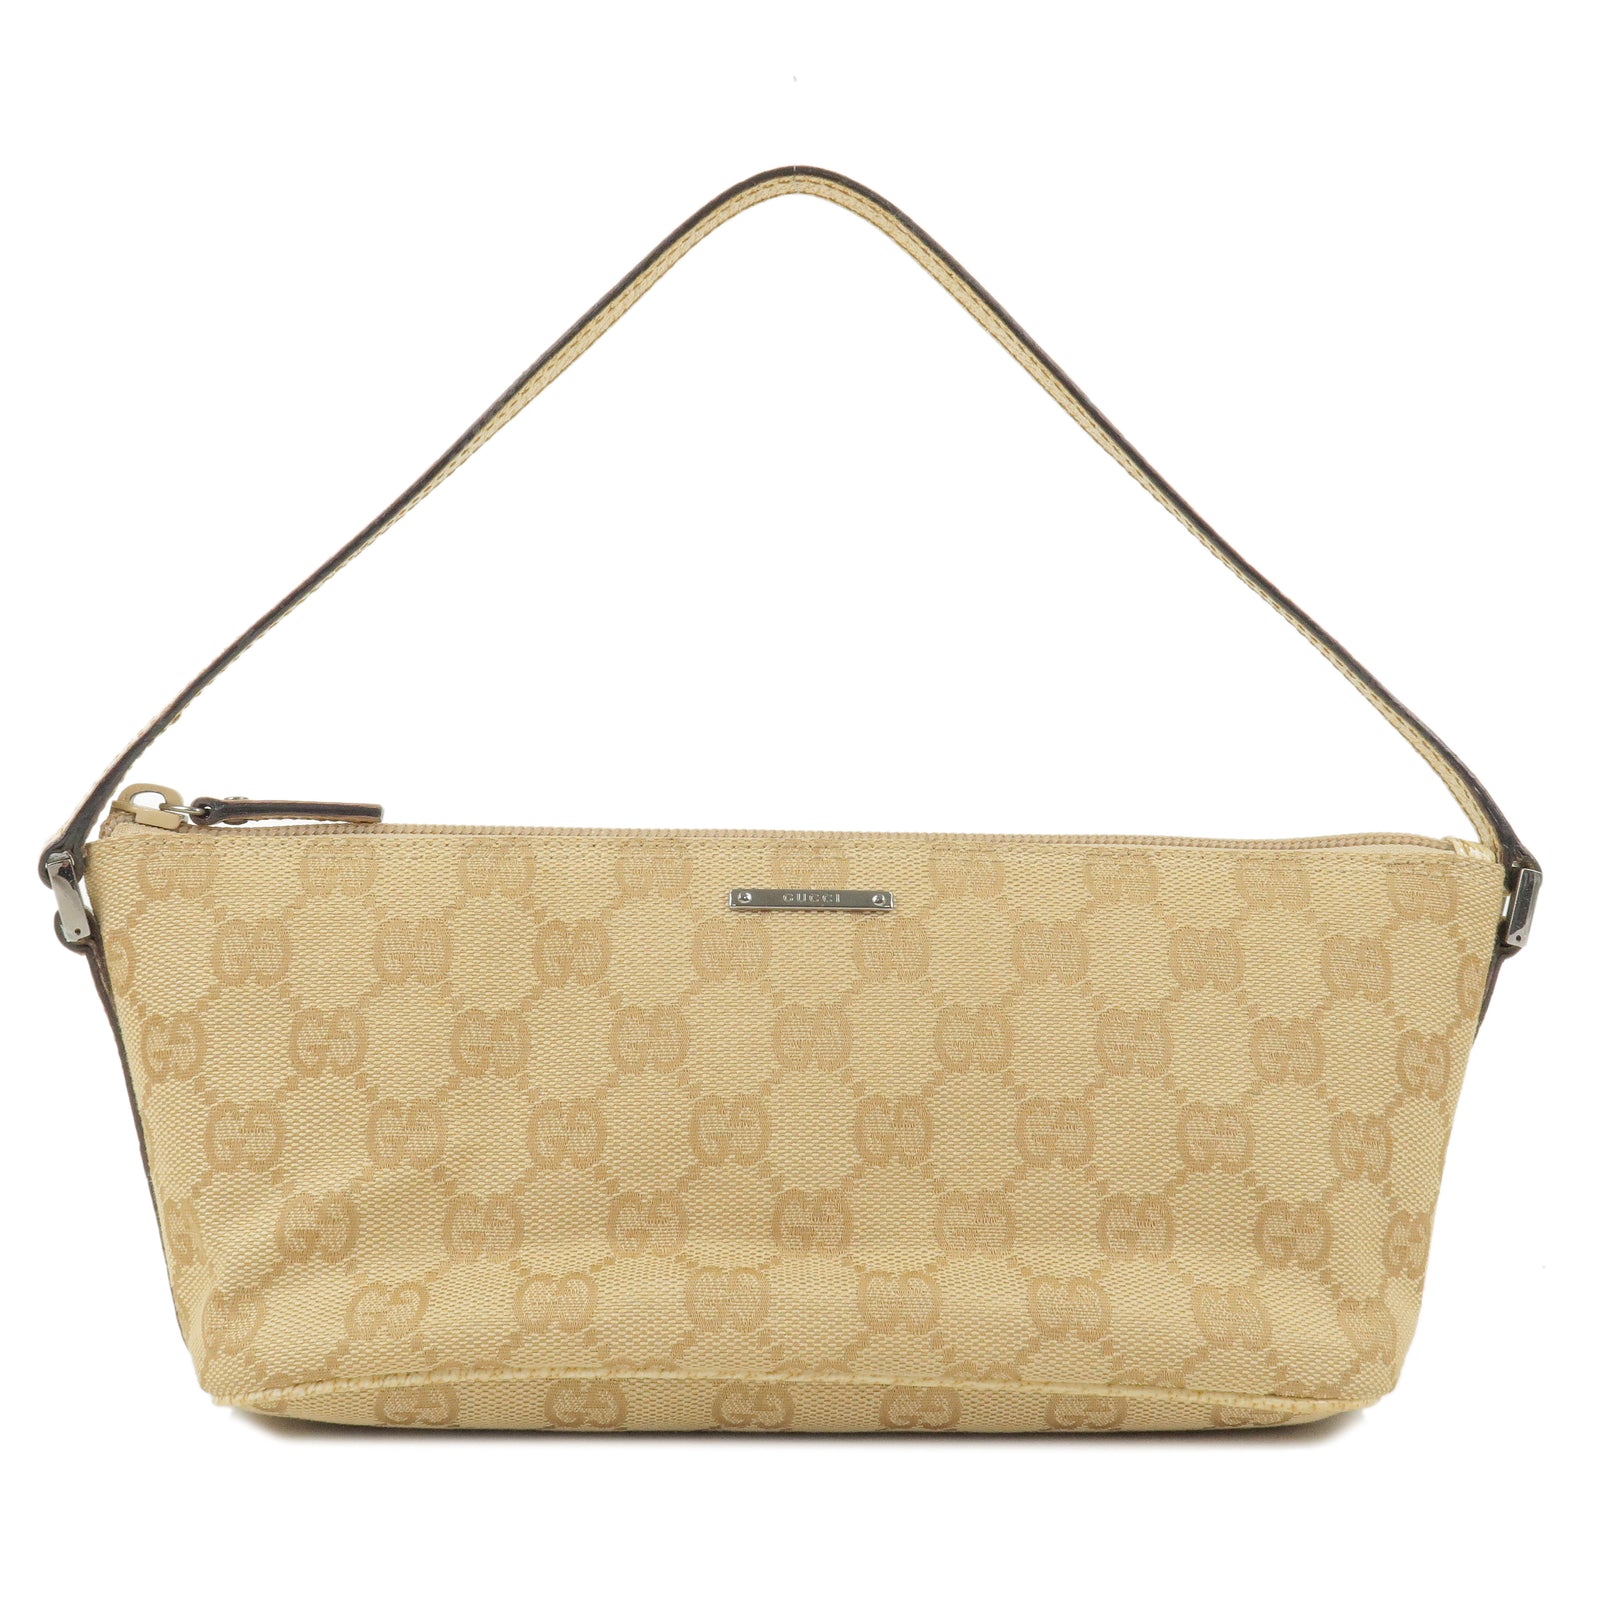 GUCCI-GG-Canvas-Leather-Boat-Bag-Hand-Bag-Pouch-Beige-07198